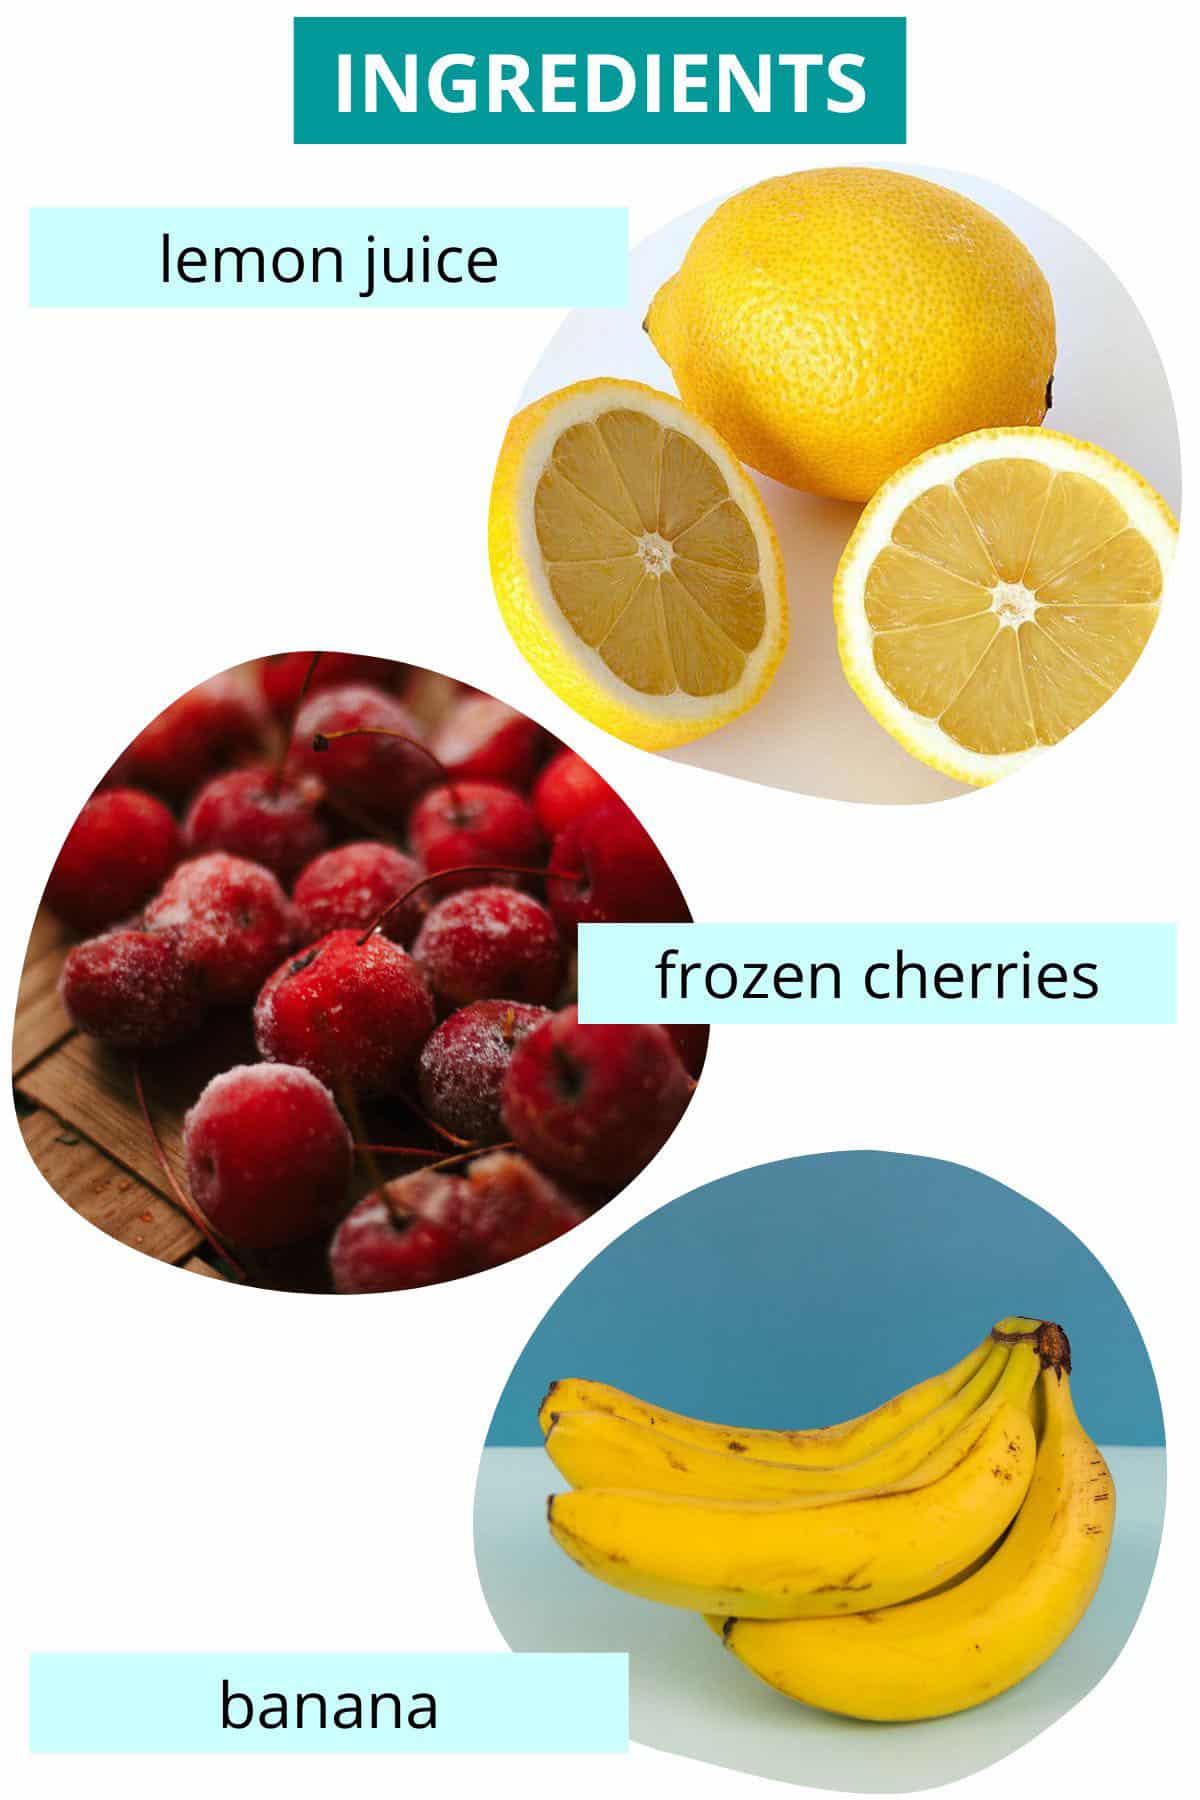 image collage showing lemons, cherries, and bananas with text labels